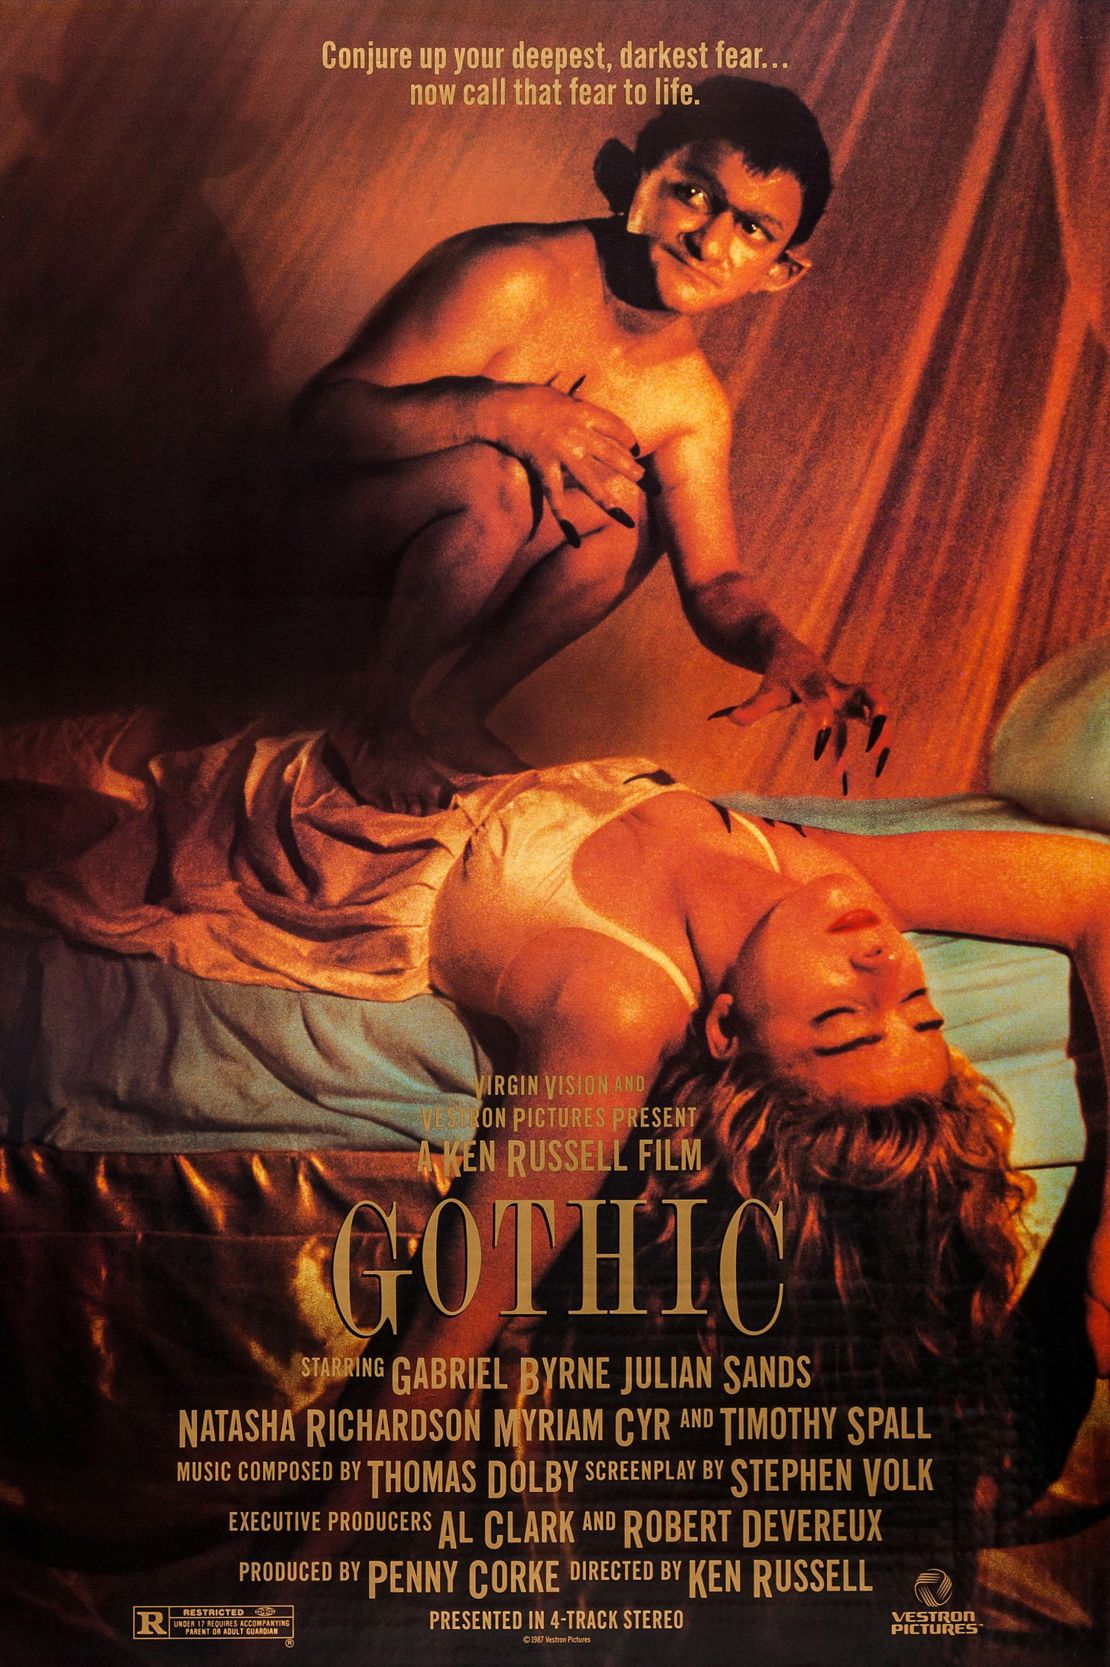 US poster for "Gothic" by British director Ken Russell.